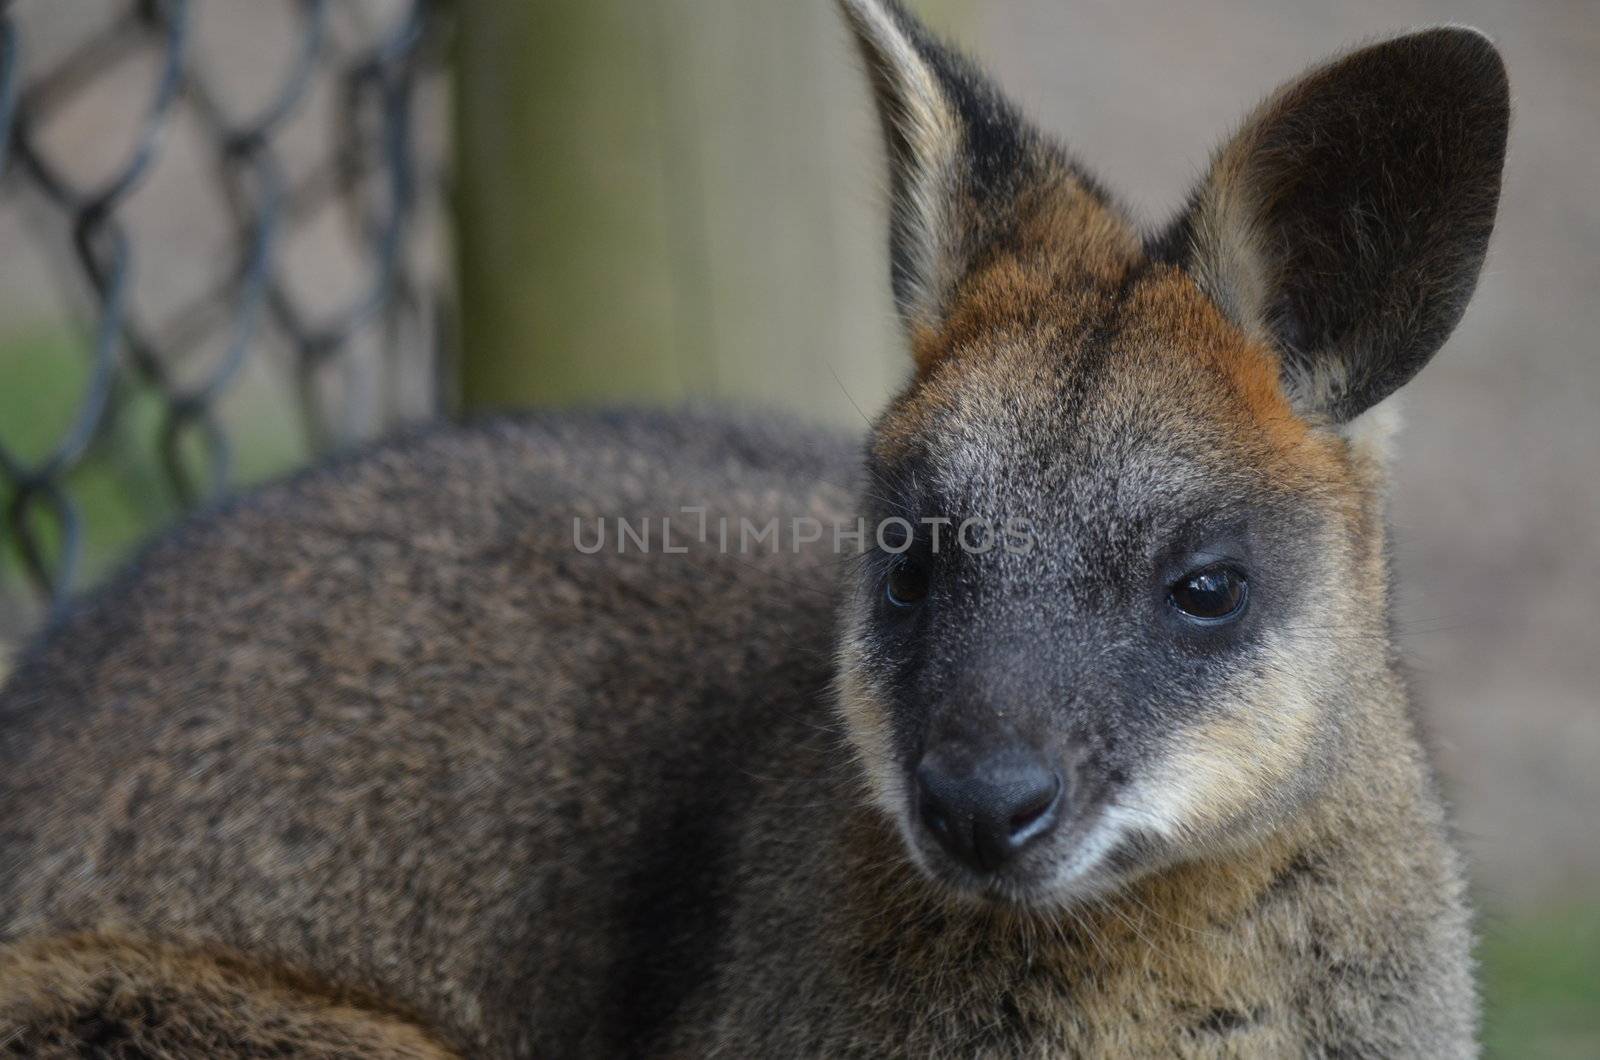 Half body side profile with close up of face of a small Australian Wallaby